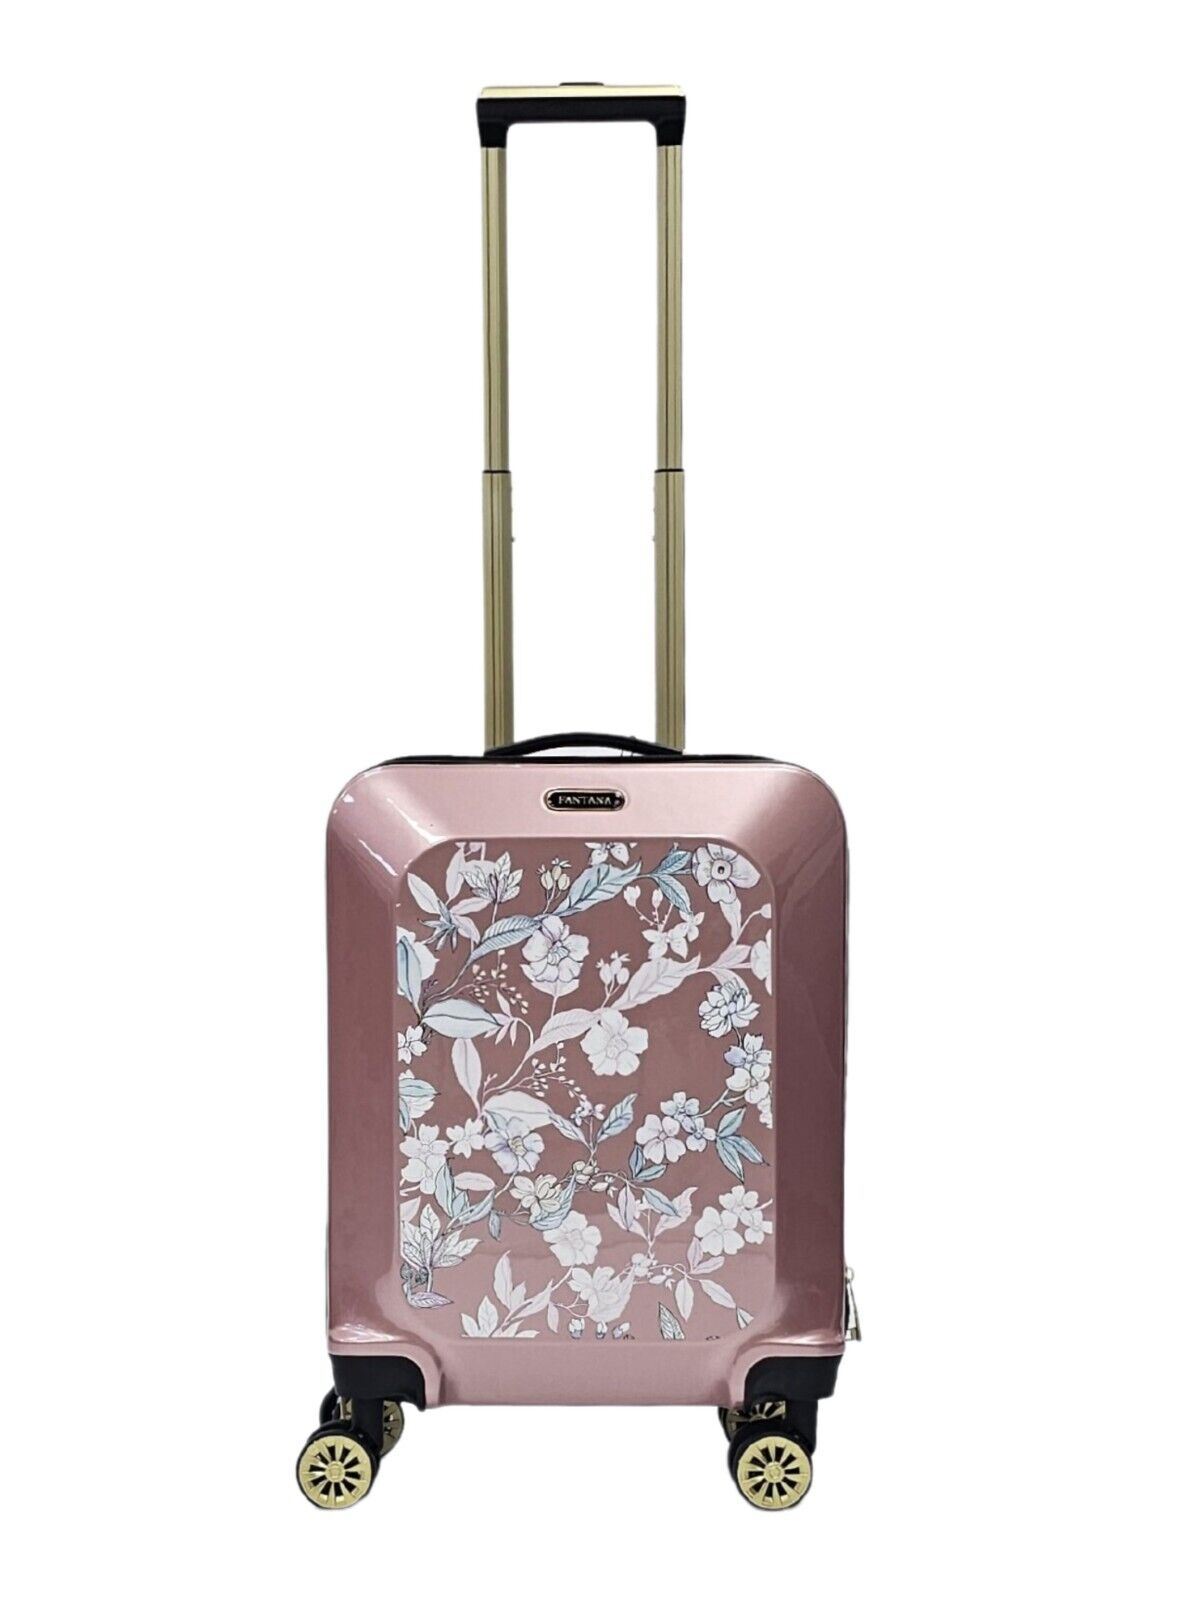 Hard Shell Cabin 4 Wheel Suitcase Flower Print Luggage - Upperclass Fashions 